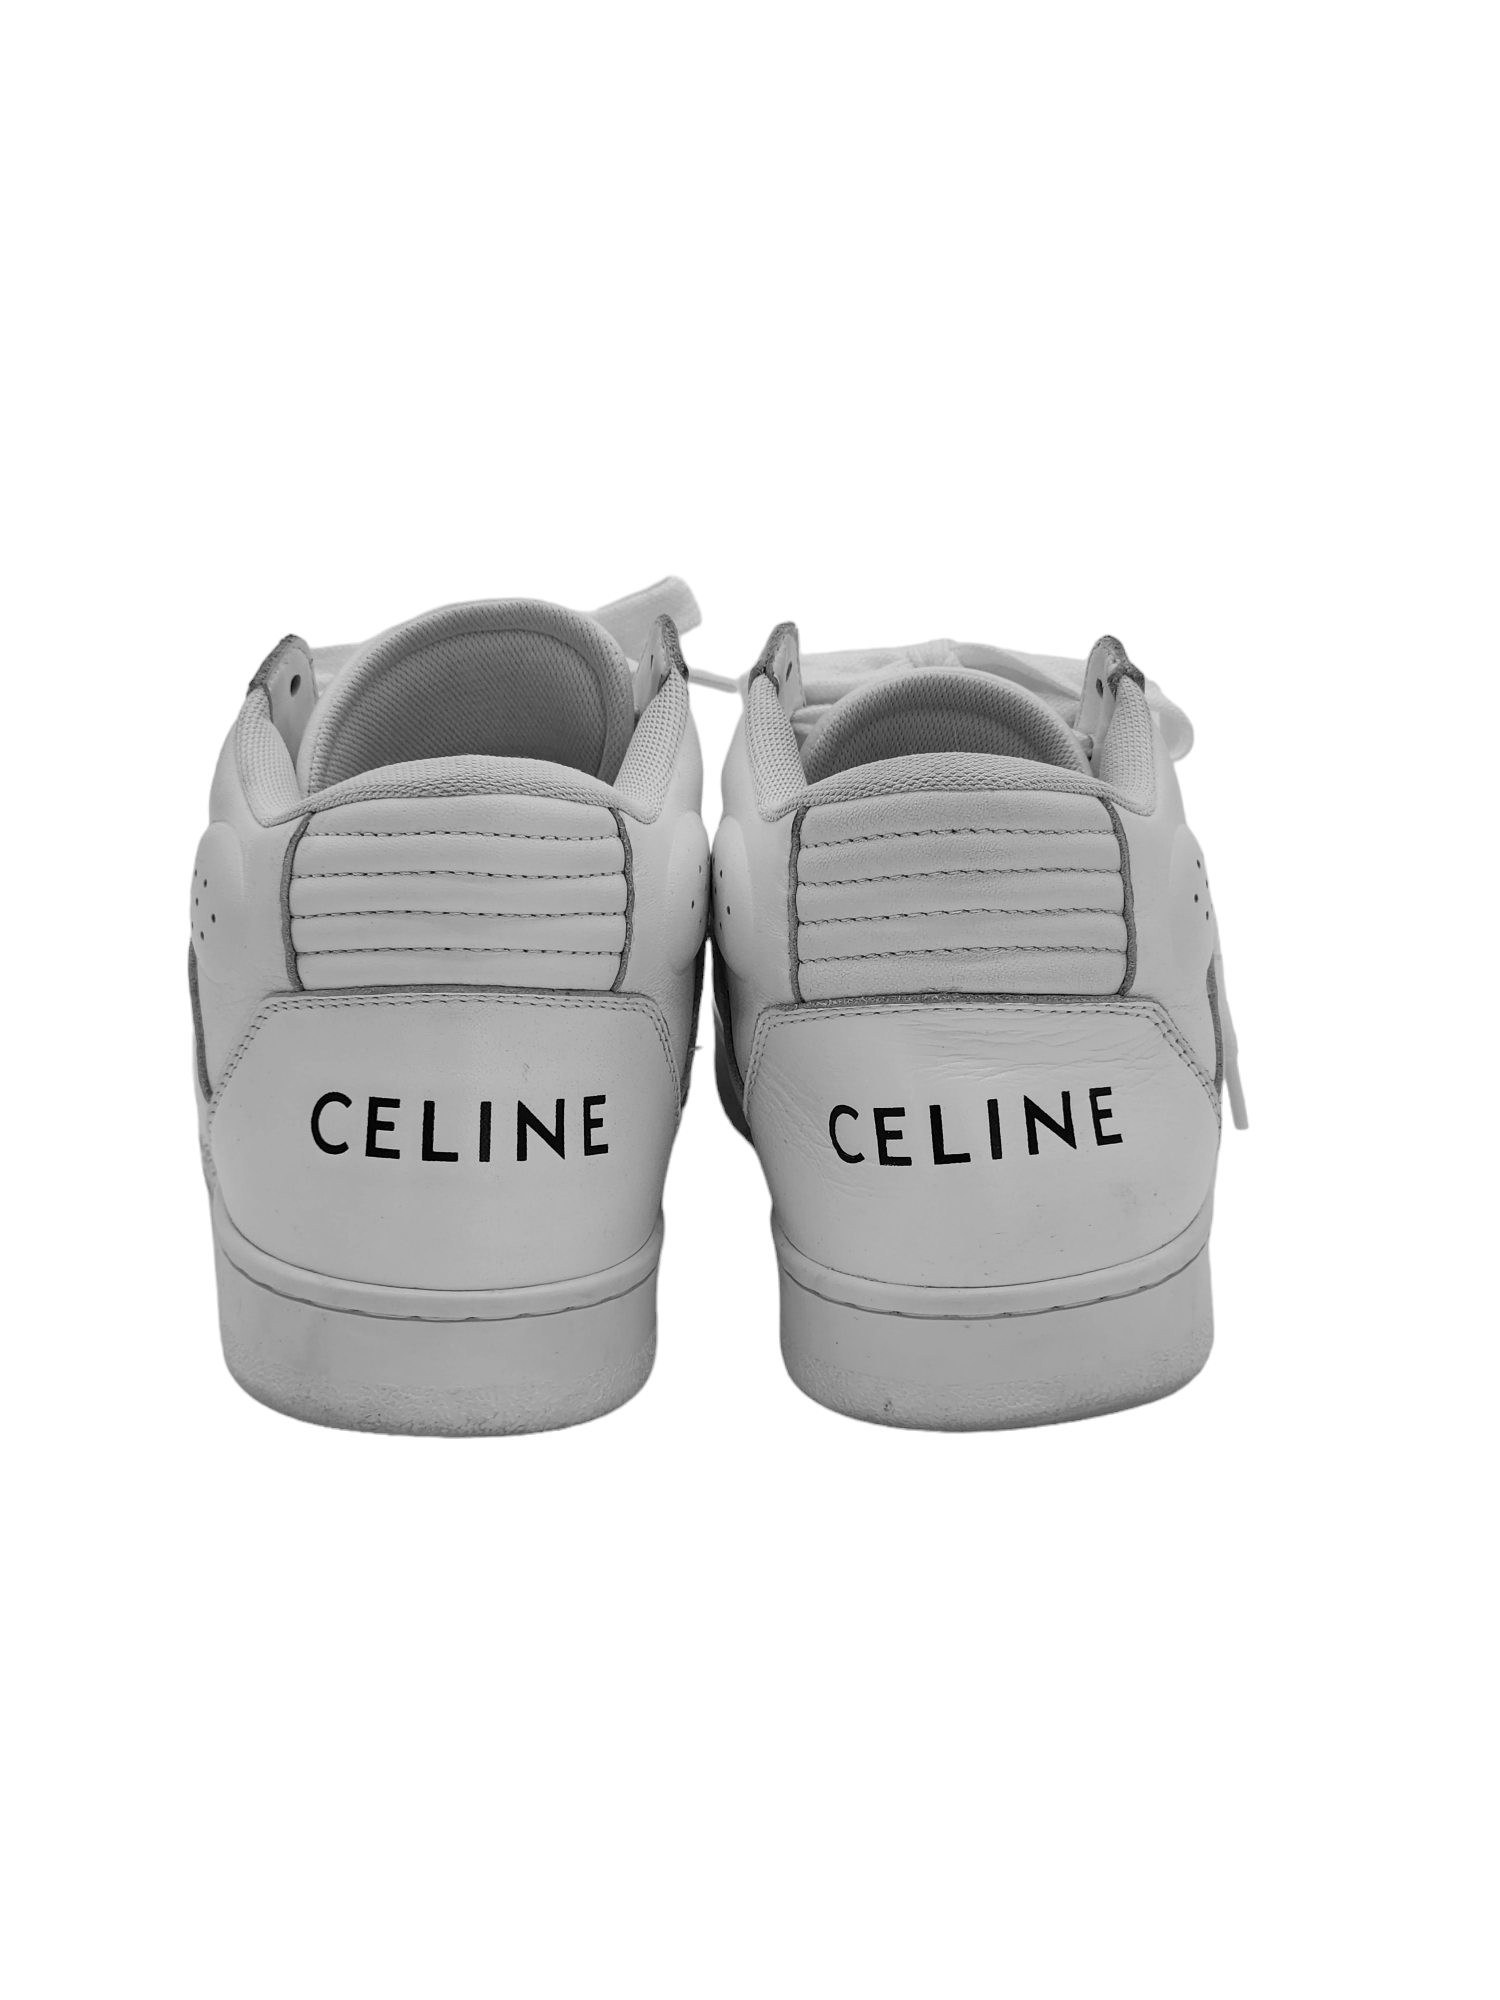 Celine White Leather Sneakers 38